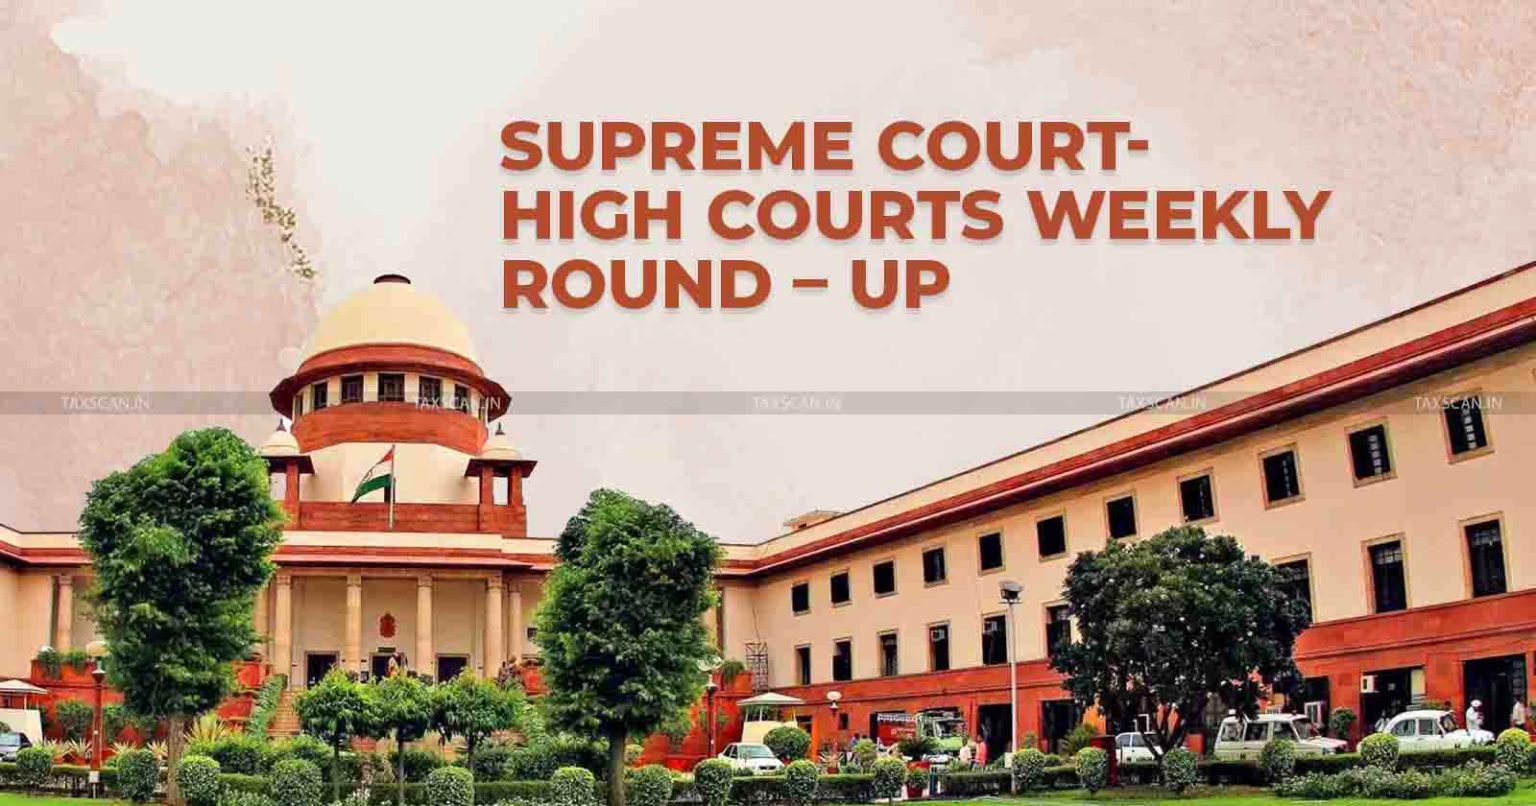 Weekly Round Up - Supreme Court - High Court - tax judgments - tax - judgments - tax news - taxscan